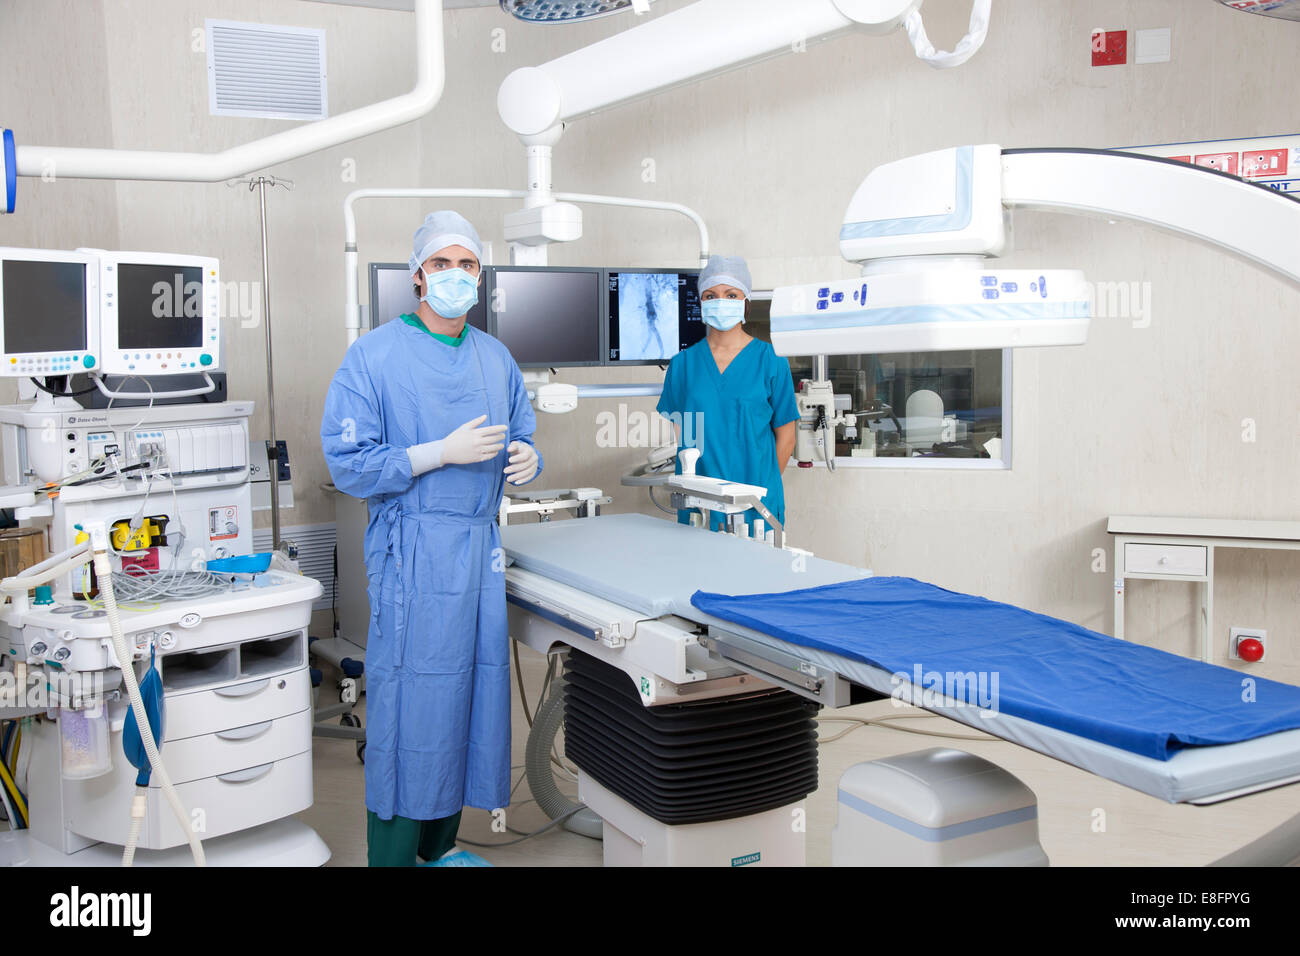 Tow doctors standing in operating theatre with robotic imaging system Stock Photo